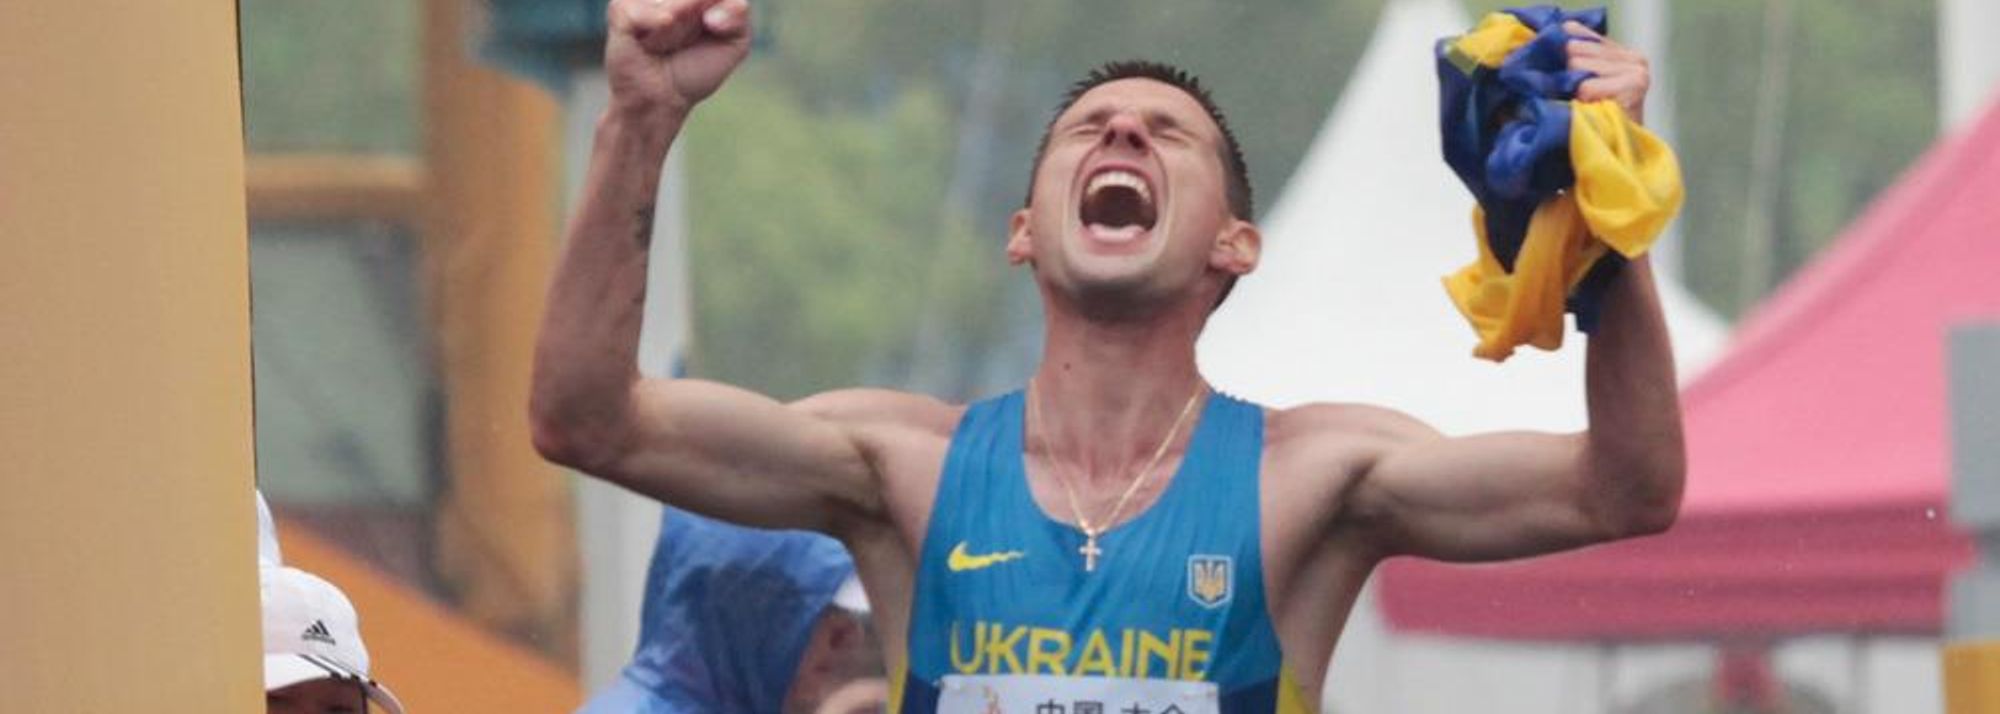 Despite his victory at the famous Lugano race back in March, there is no doubt that Ruslan Dmytrenko’s 20km win at the 2014 IAAF World Race Walking Cup was the most surprising of the weekend.